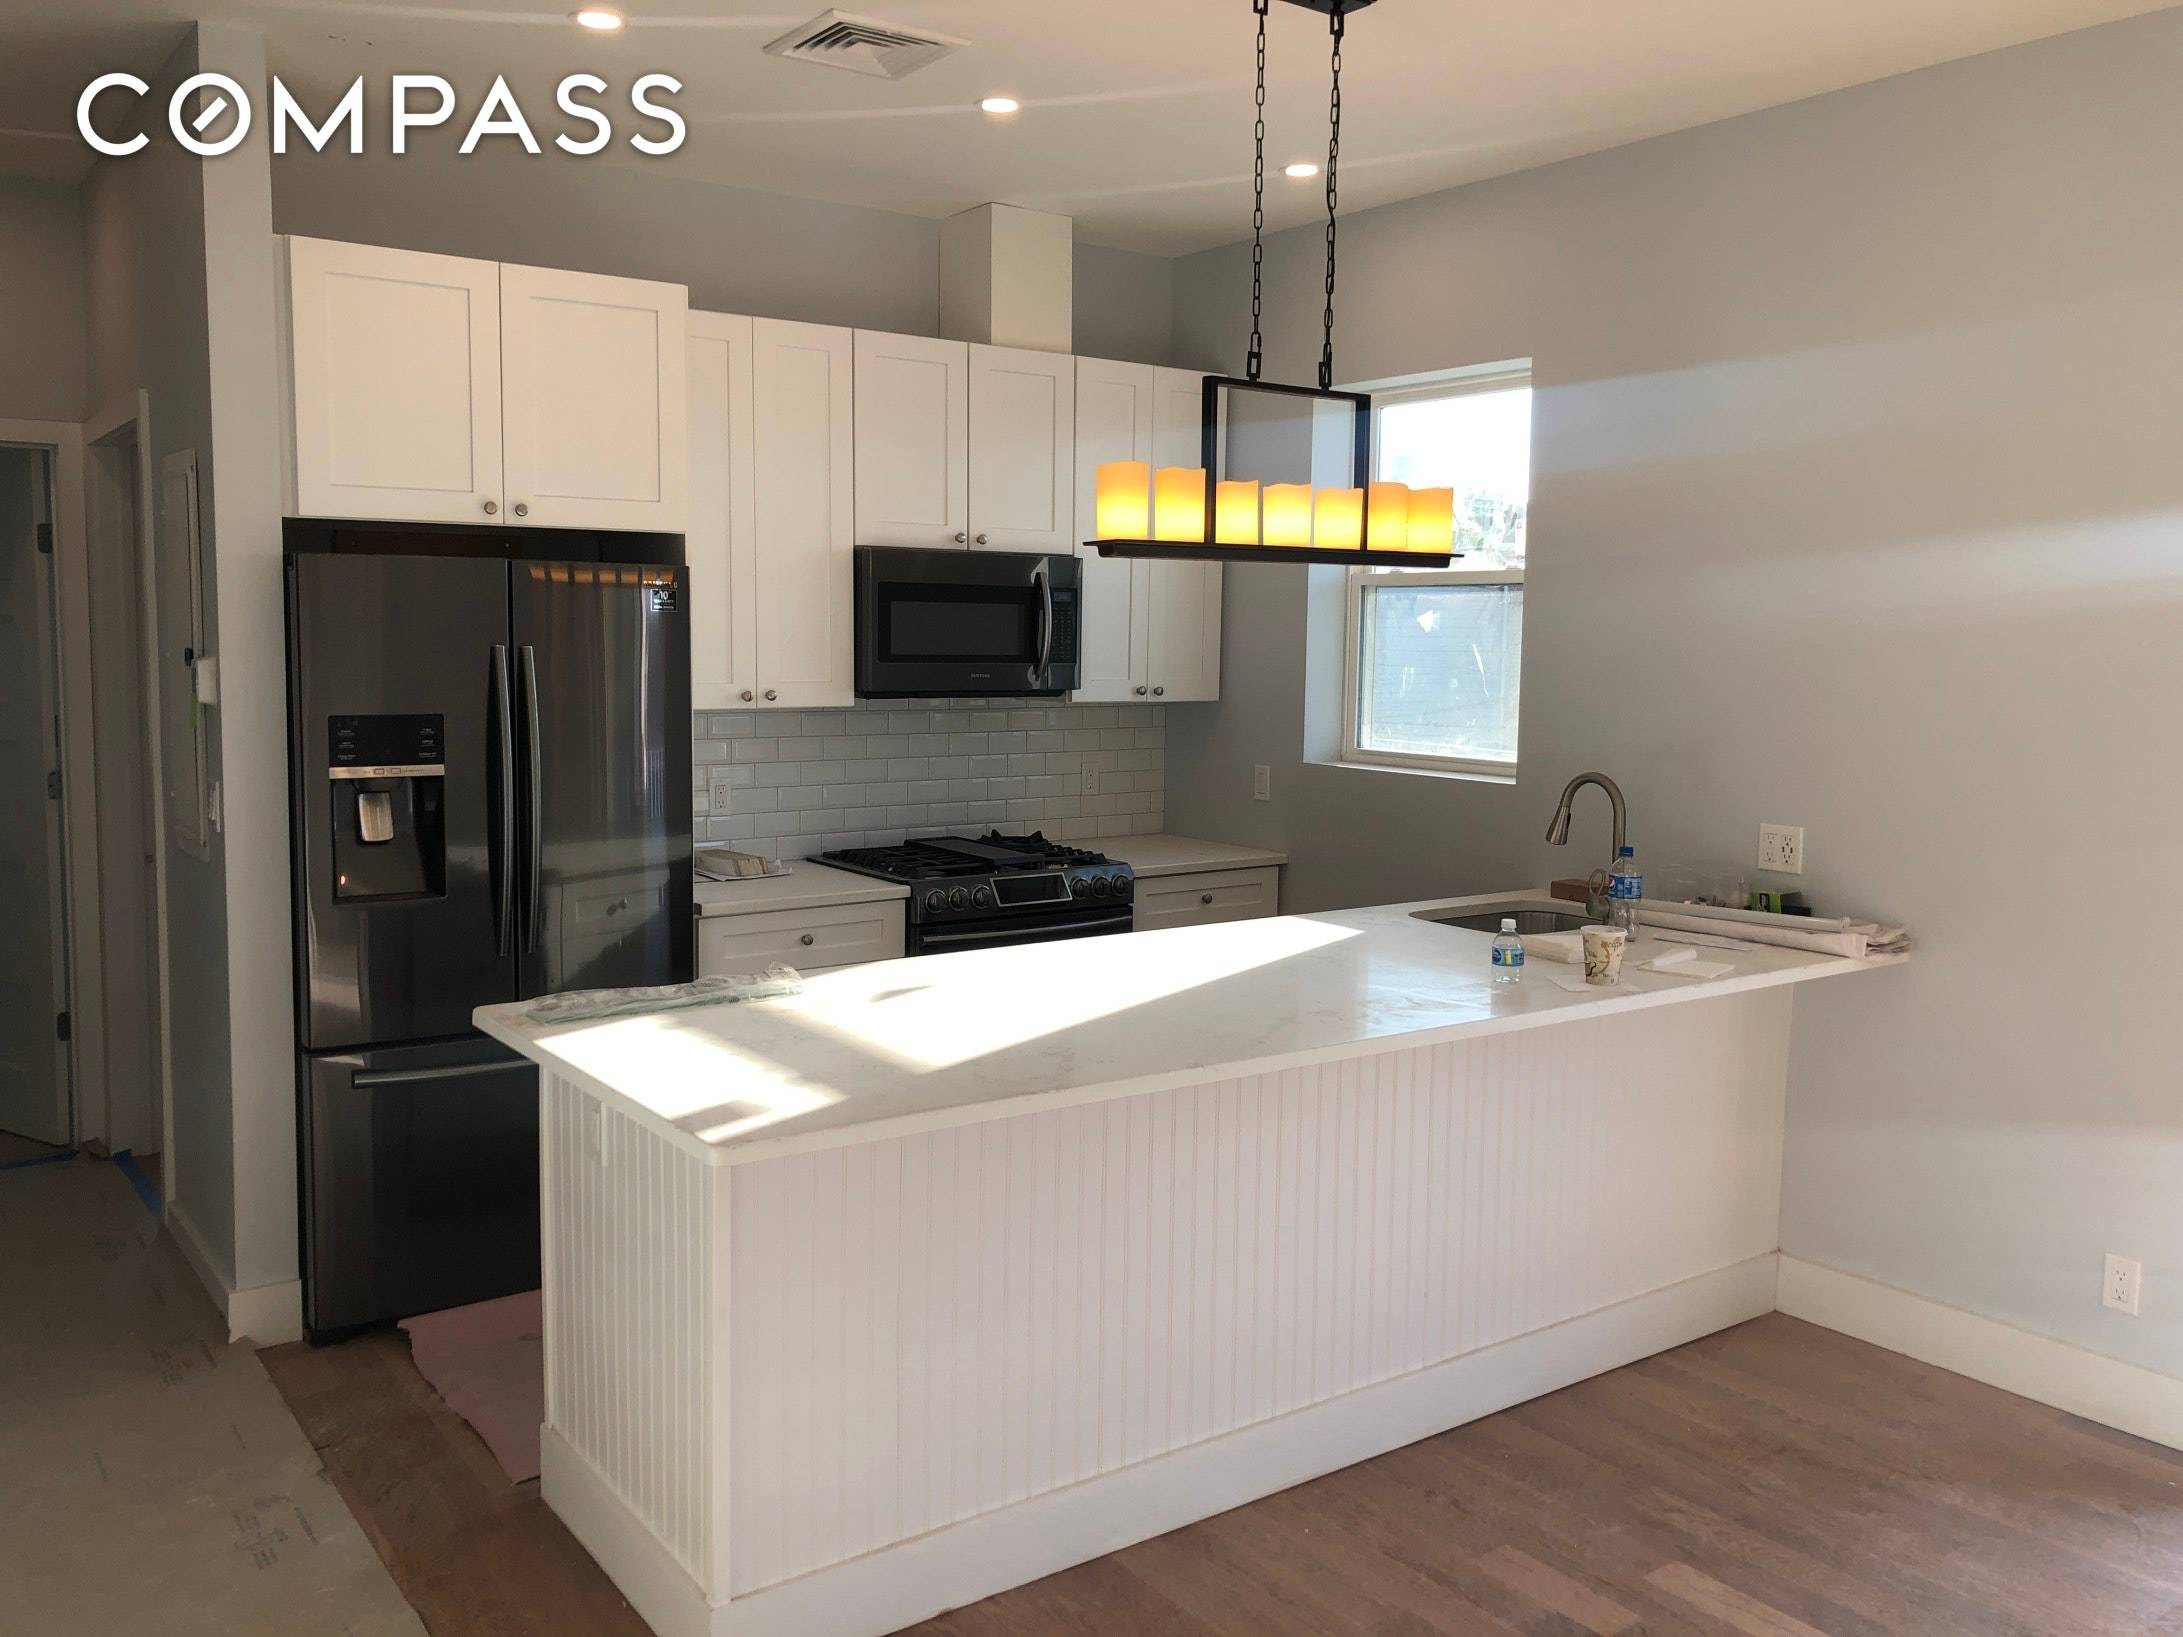 Compass Coming Soon... Incredible renovation this 2Bed 1.